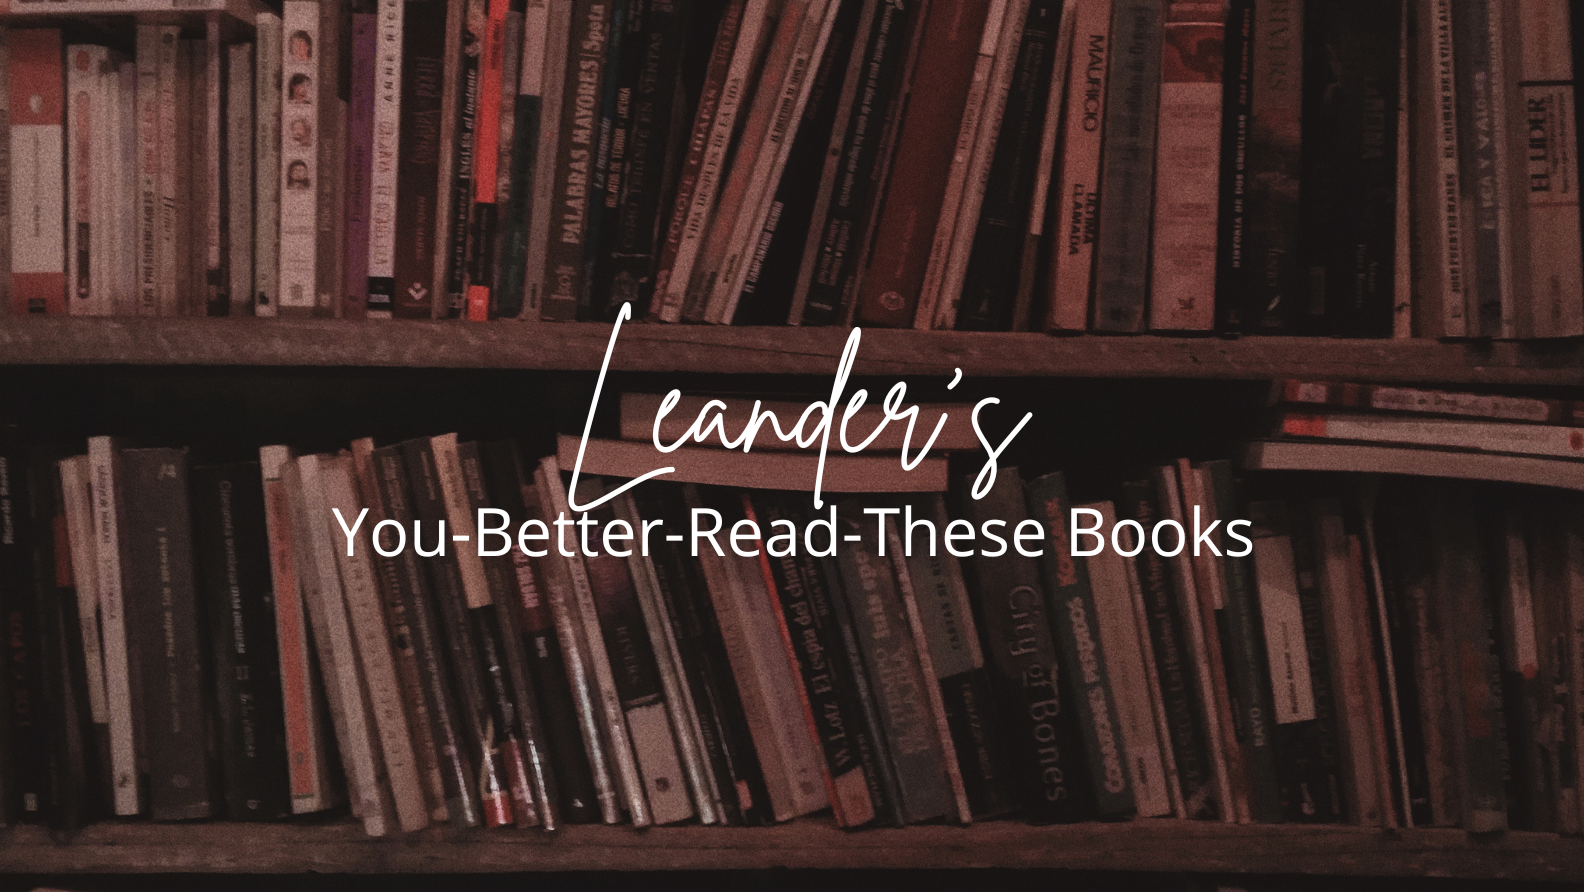 Leander's You-Better-Read-These Books | Vol. 001 [Harry Potter]